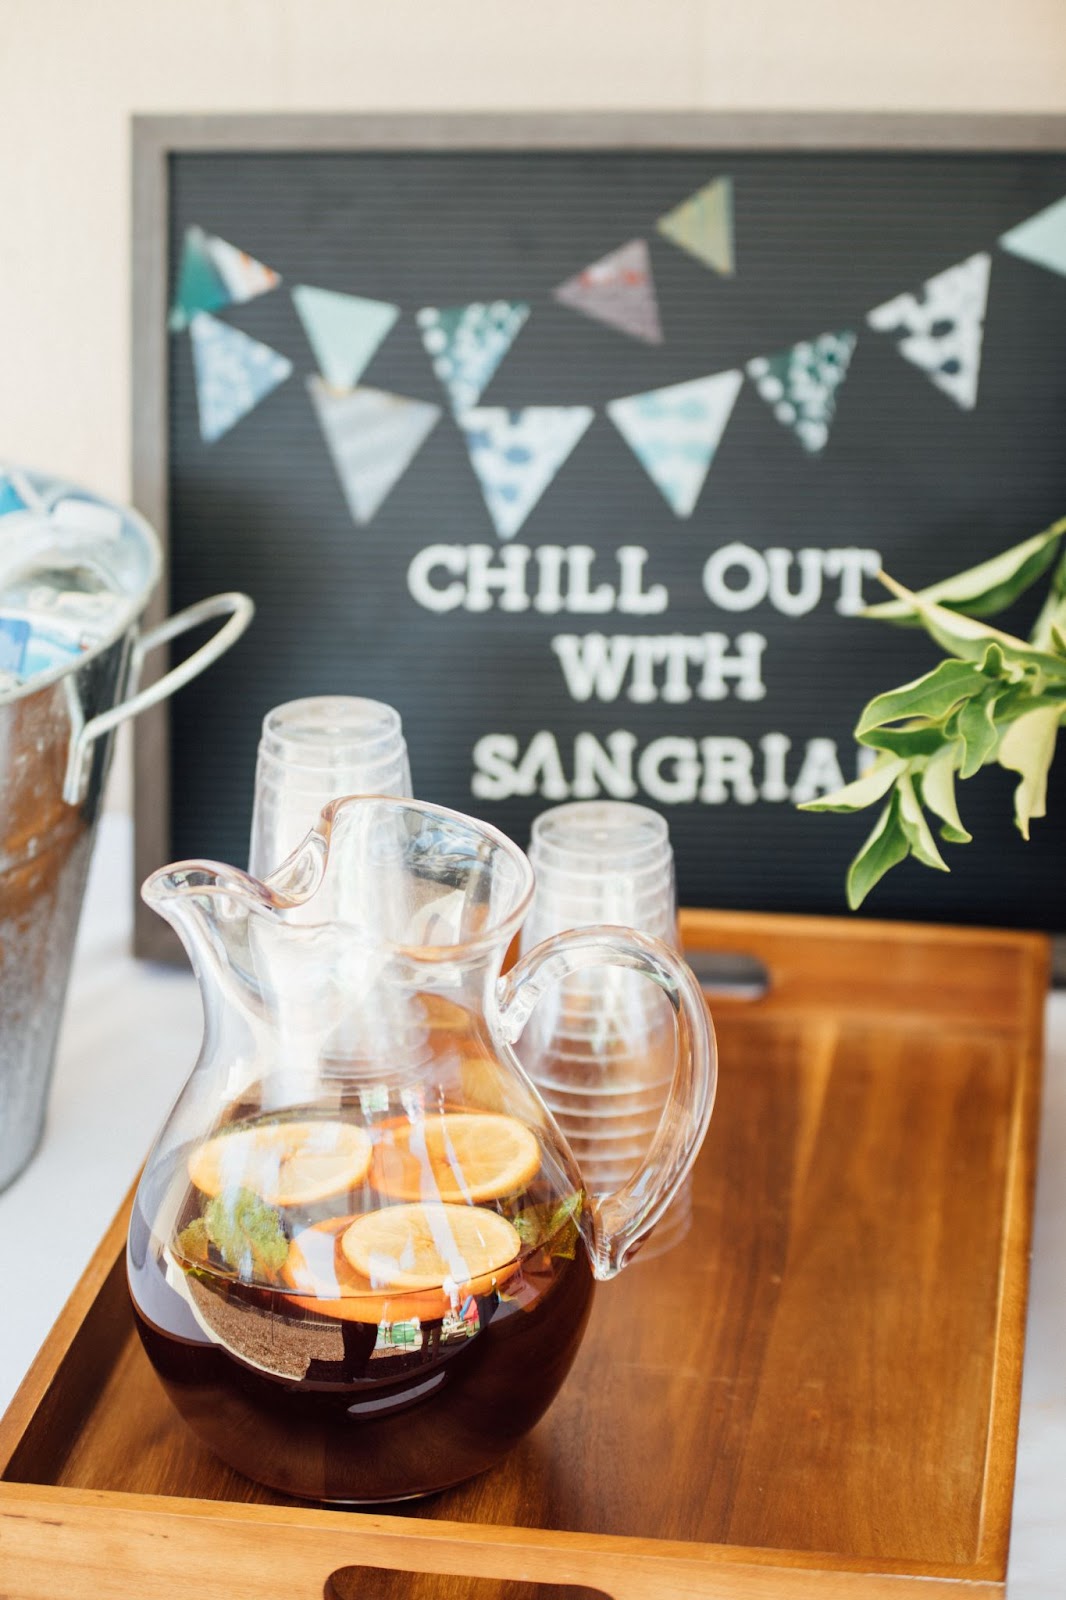 Happy National Sangria Day - December 20th